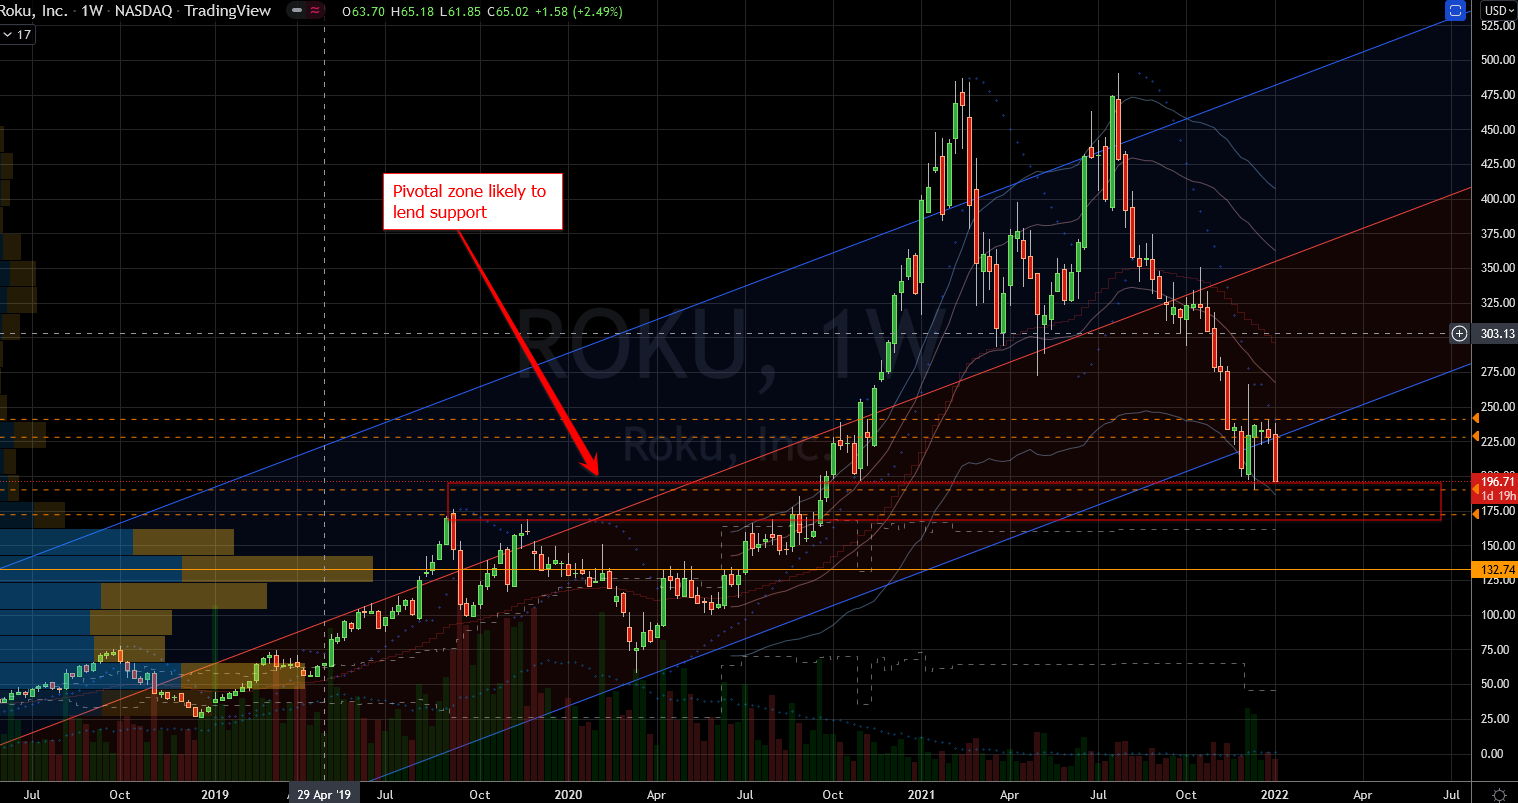 Stocks to Buy: Roku Stock Chart Showing Potential Base